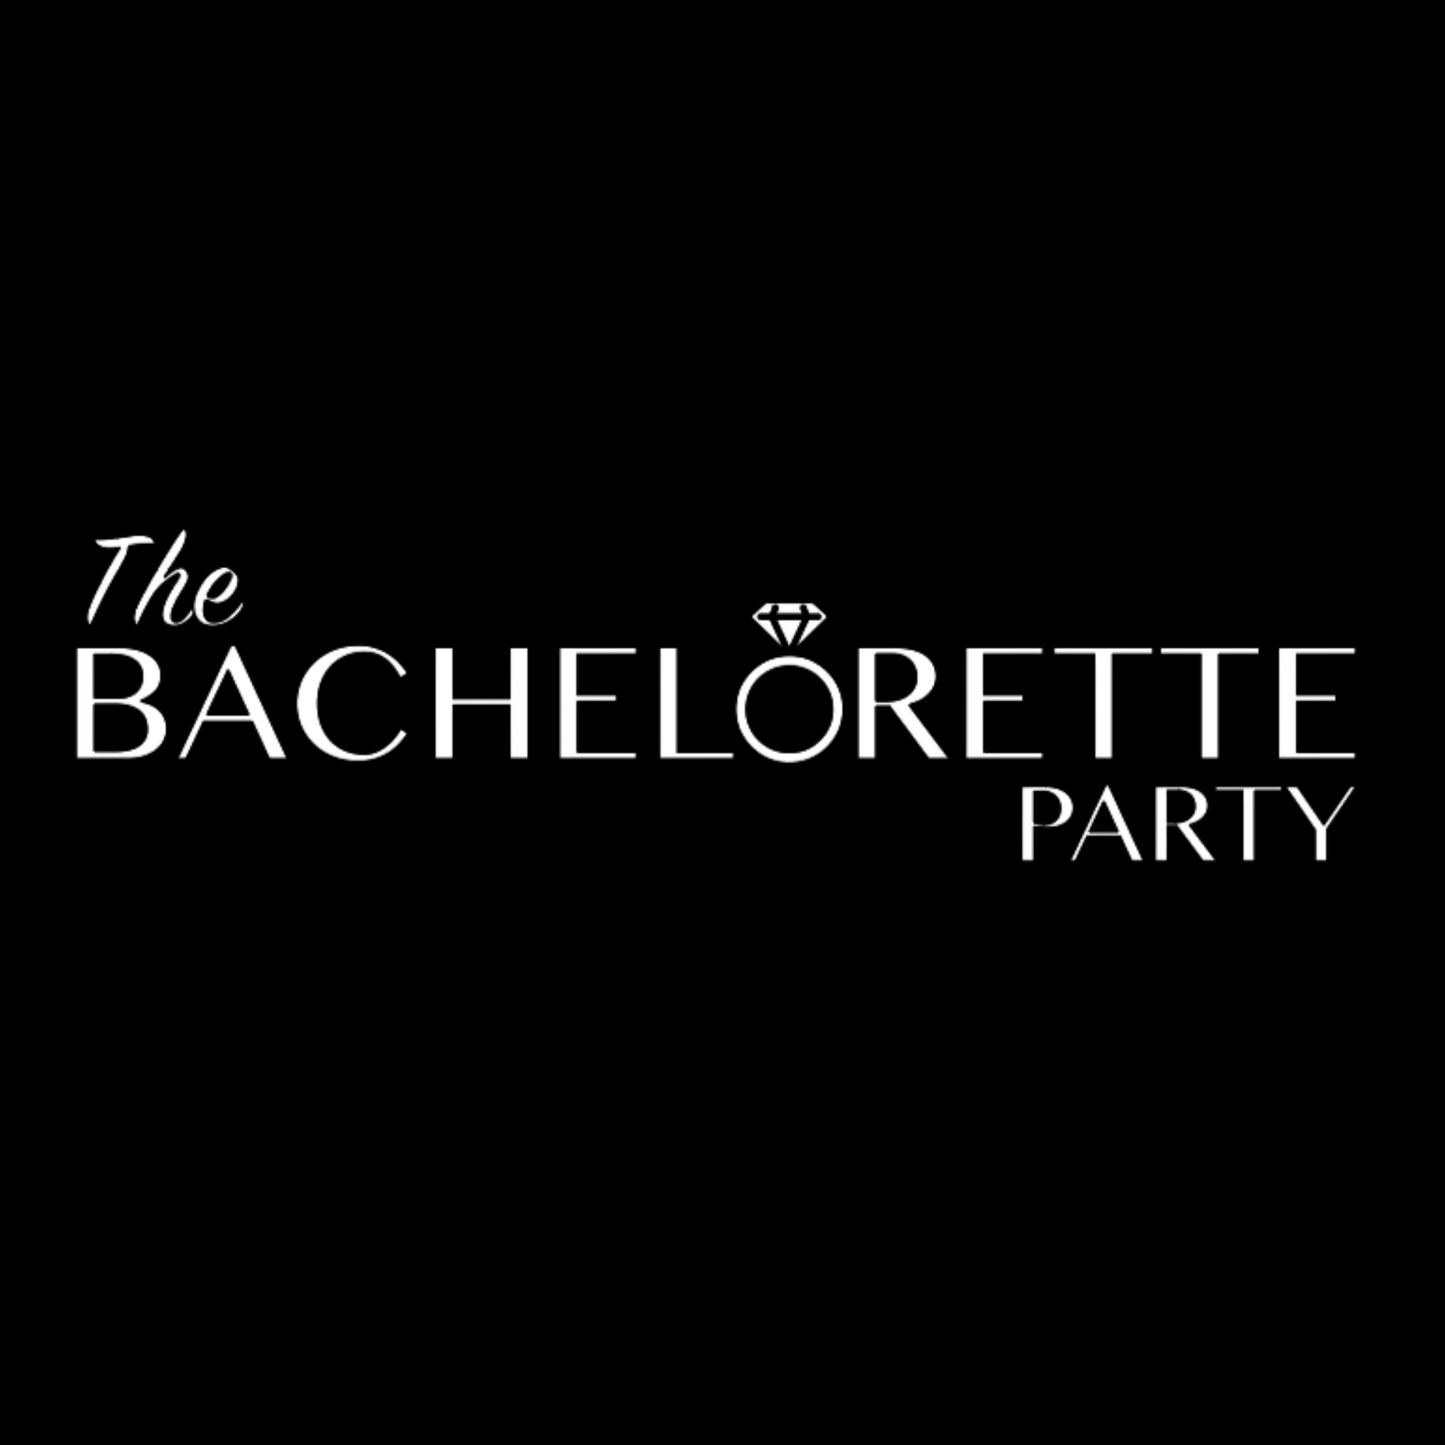 The Bachelorette Party T-Shirt in black. The design in on the front is in white with "The" being smaller script font, "Bachelorette" and "Party" being a bold font. The O in Bachelorette is a diamond ring. This the unclose image of the design in white on a black background.